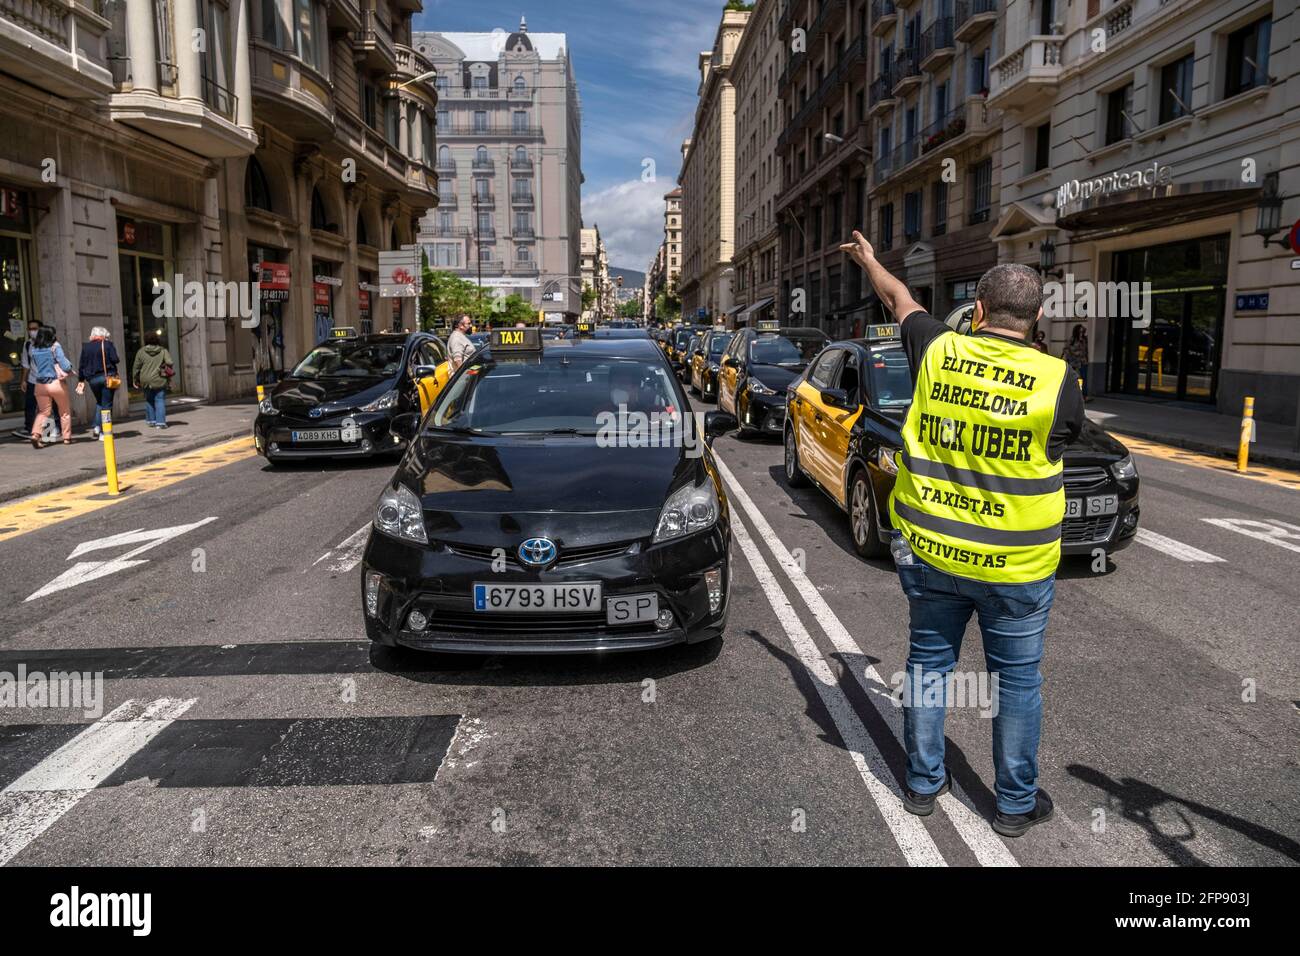 Barcelona, Spain. 20th May, 2021. Tito Álvarez, leader and spokesman for  the taxi drivers, seen directing the slow march on Vía Lietana.Unions and  taxi groups have demonstrated with a slow march of